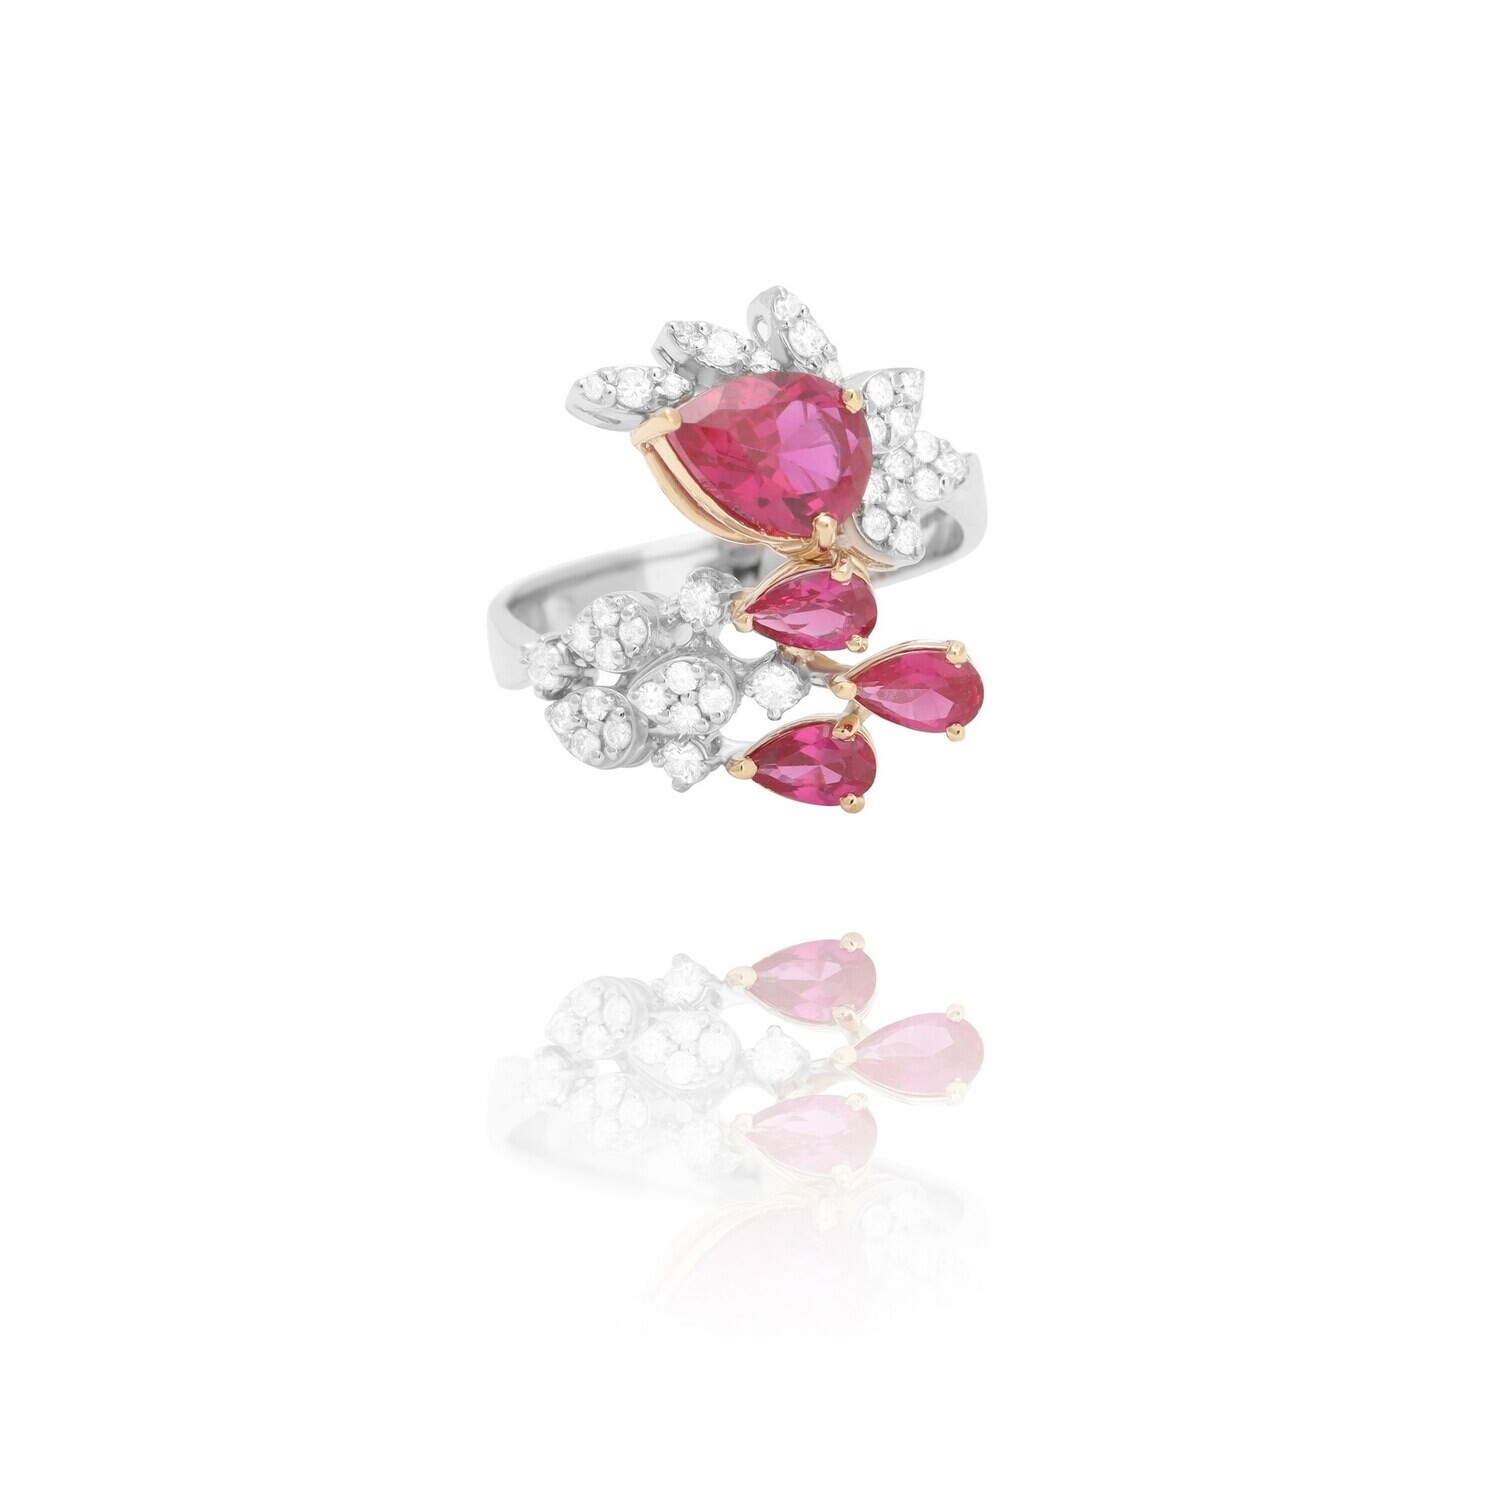 Eternal Diamond Ring with Pink Stones